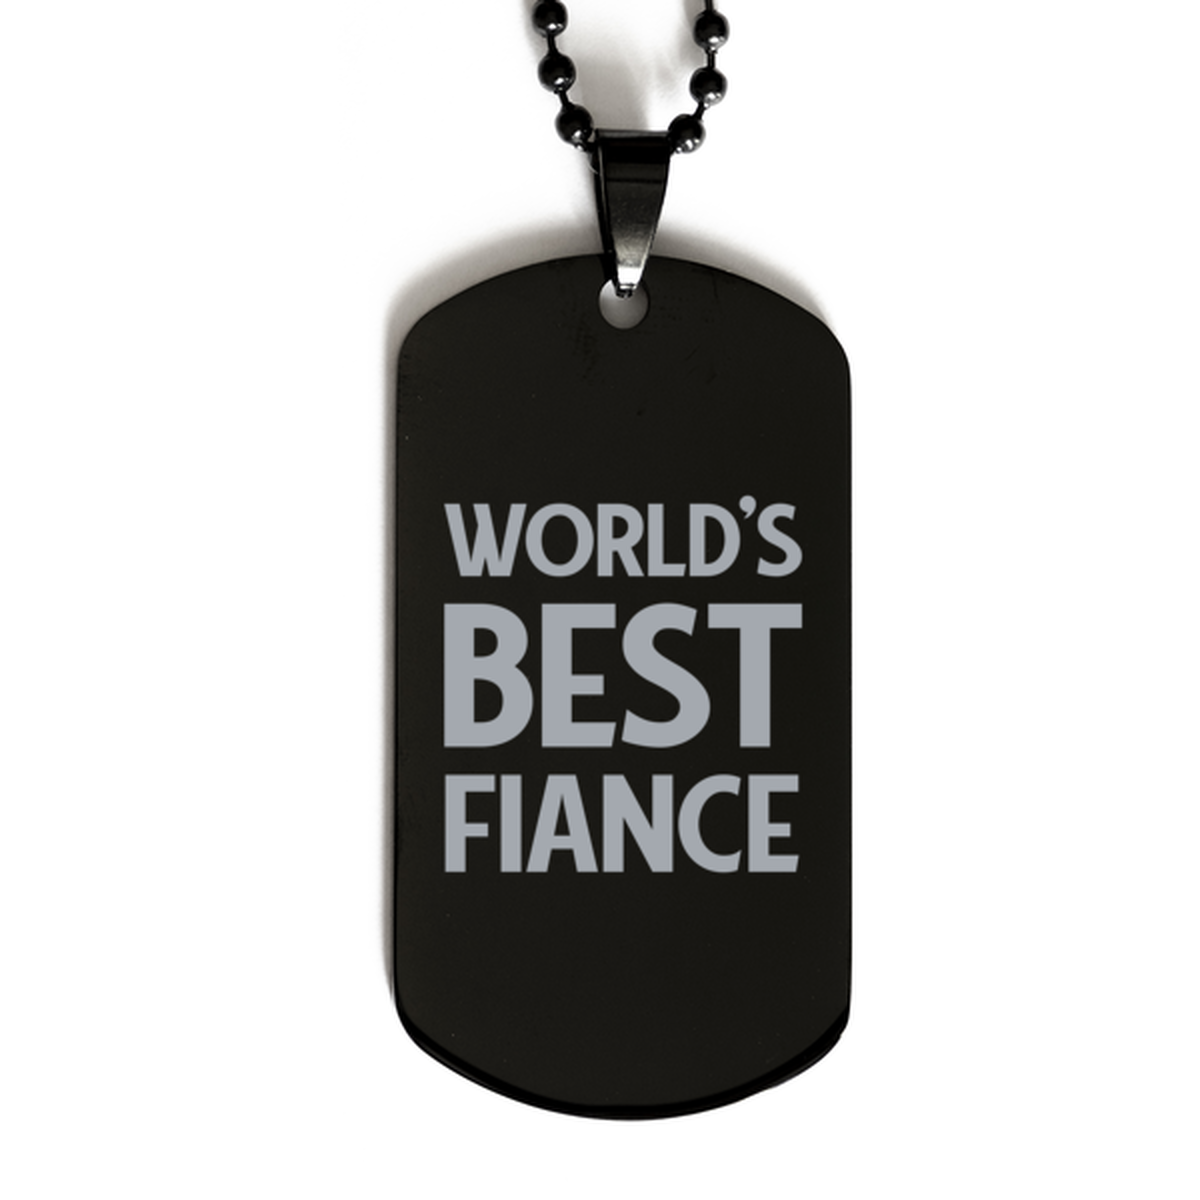 Worlds Best Fiance Gifts, Funny Black Engraved Dog Tag For Fiance, Birthday Presents For Men